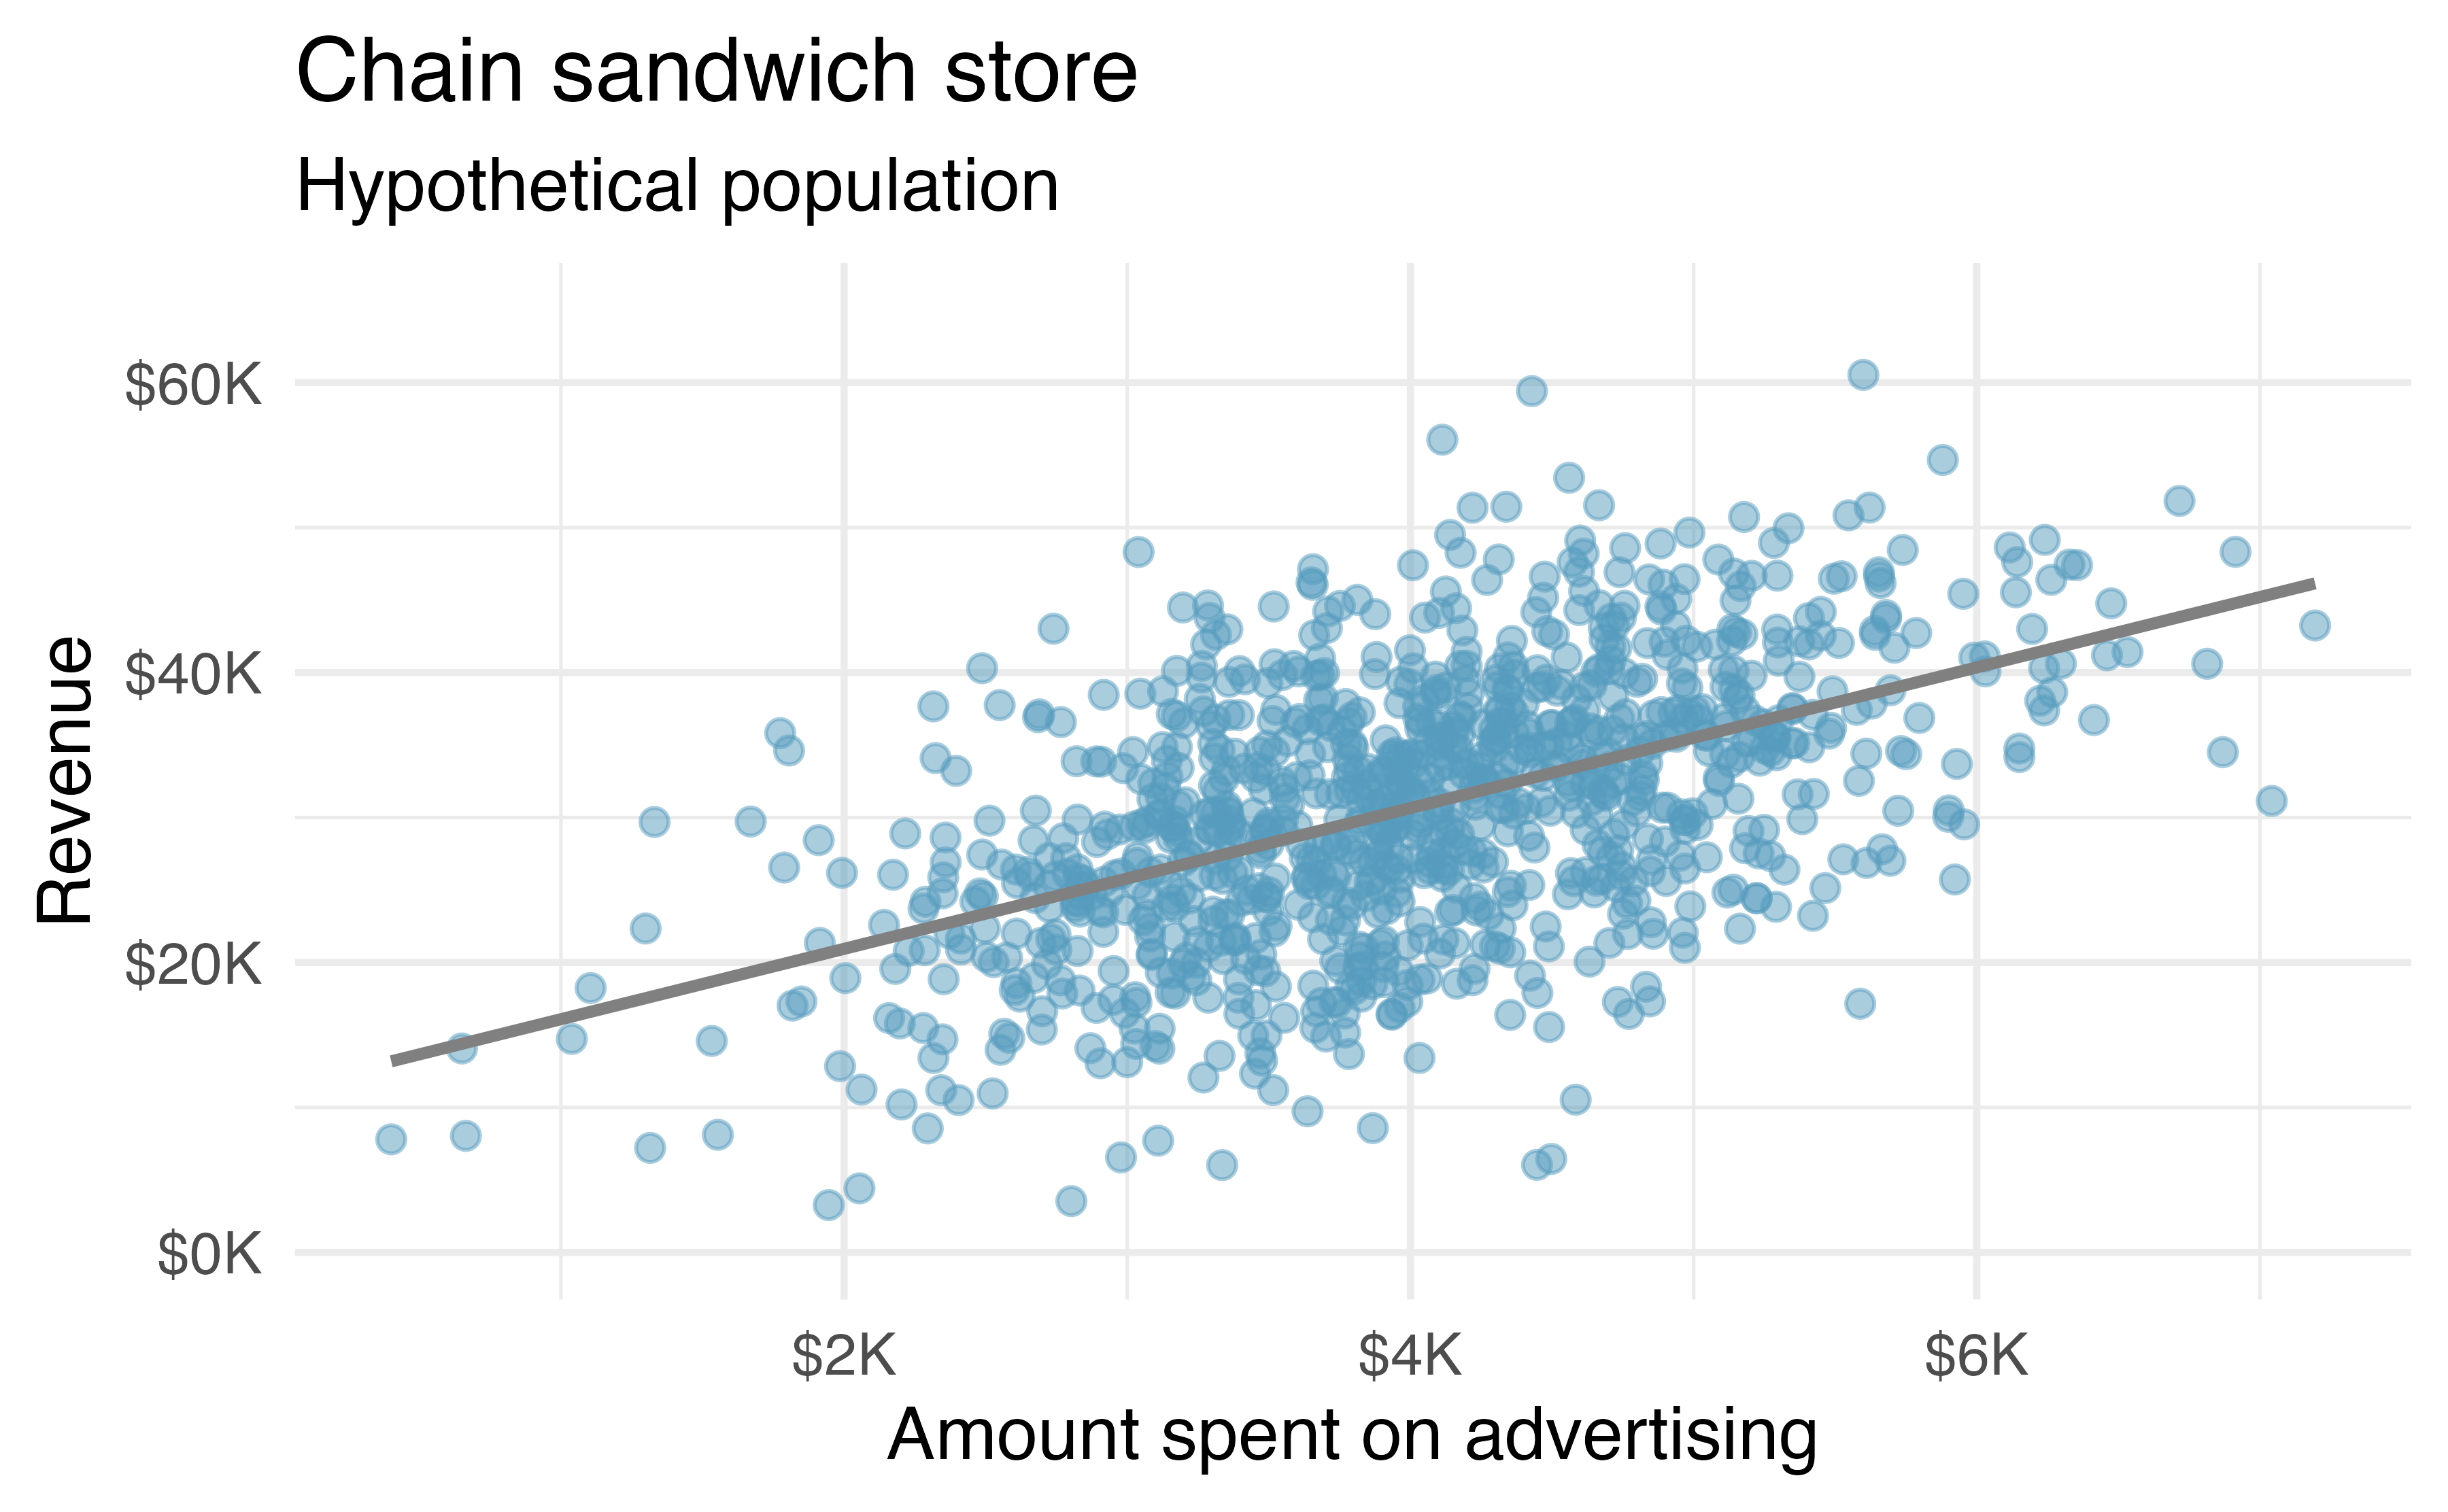 Scatterplot with advertising amount on the x-axis and revenue on the y-axis. A linear model is superimposed.  The points show a reasonably strong and positive linear trend.